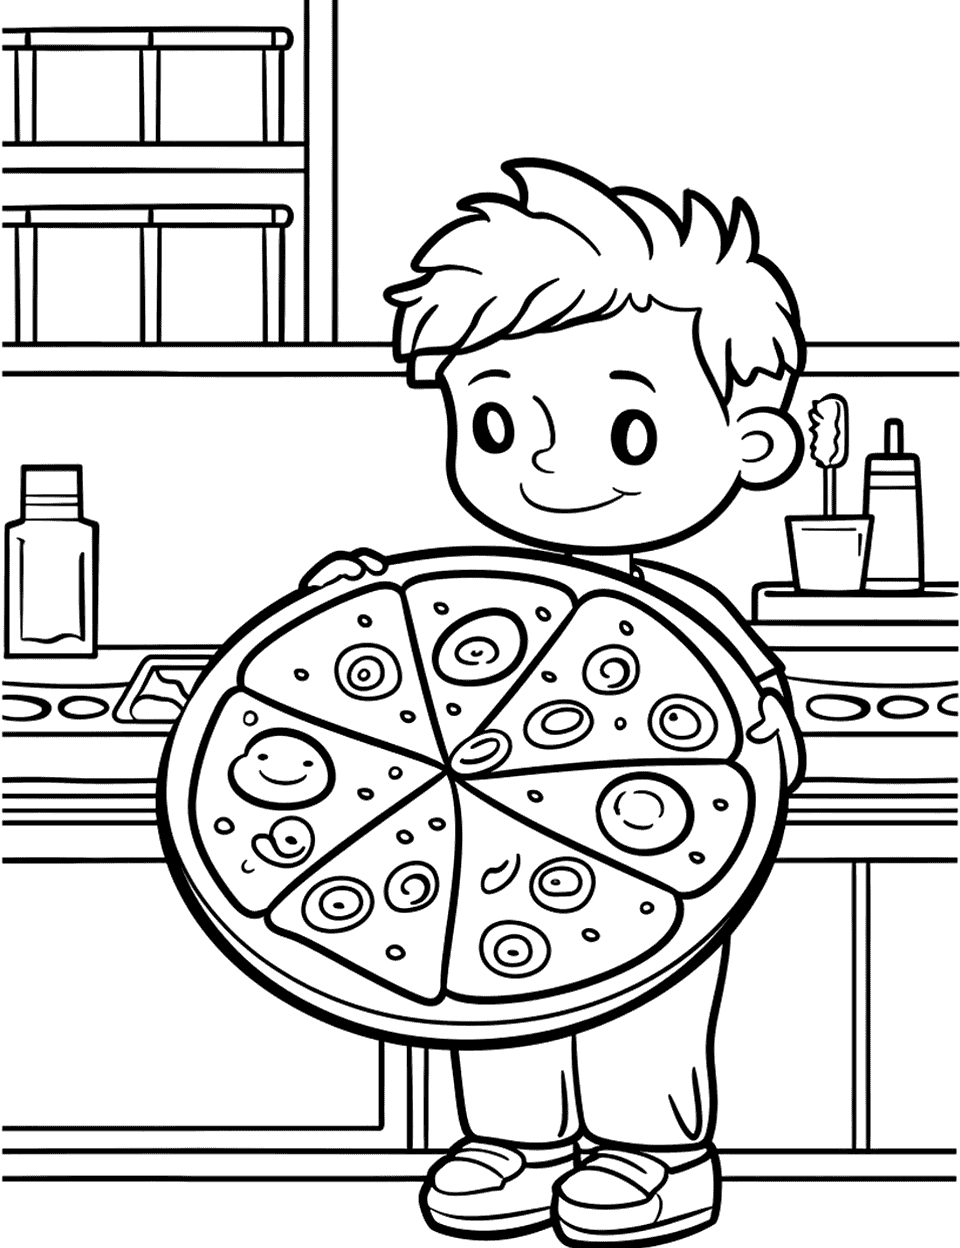 Little Chef's First Pizza Coloring Page - A kid proudly holding a pizza they just made, standing next to a kitchen counter.